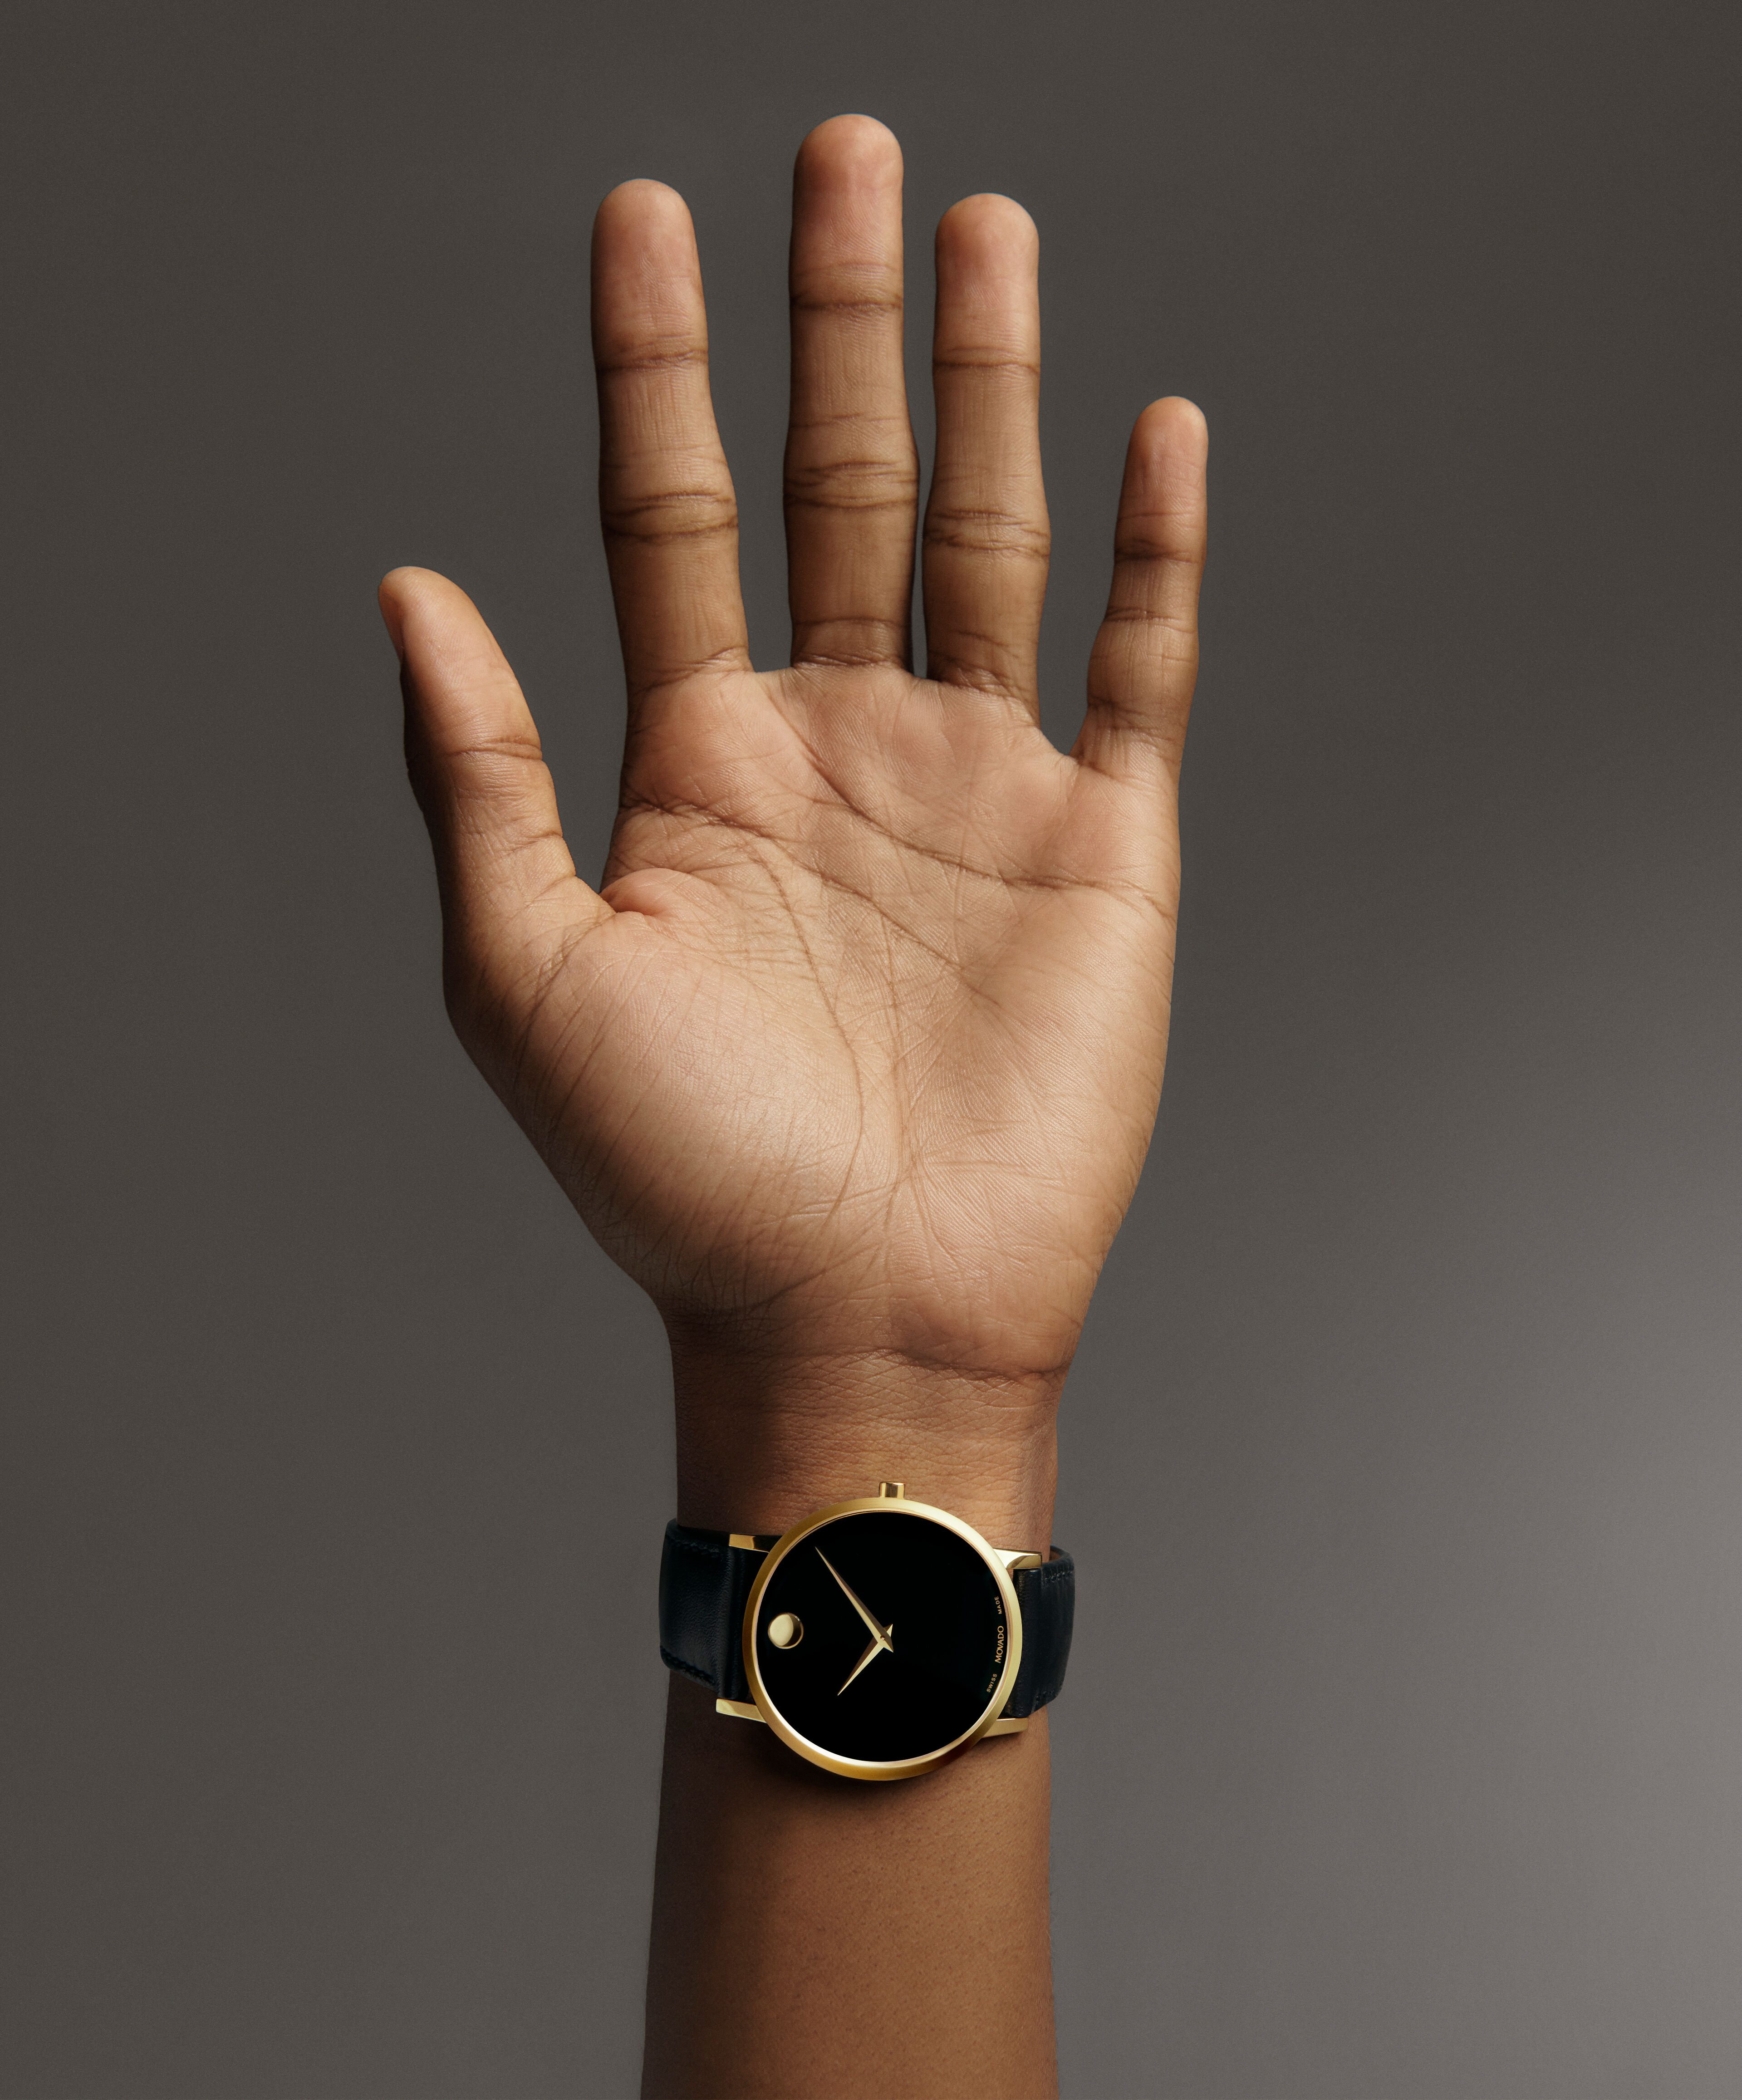 Movado | Museum Classic Men's Gold PVD Watch With Black Strap